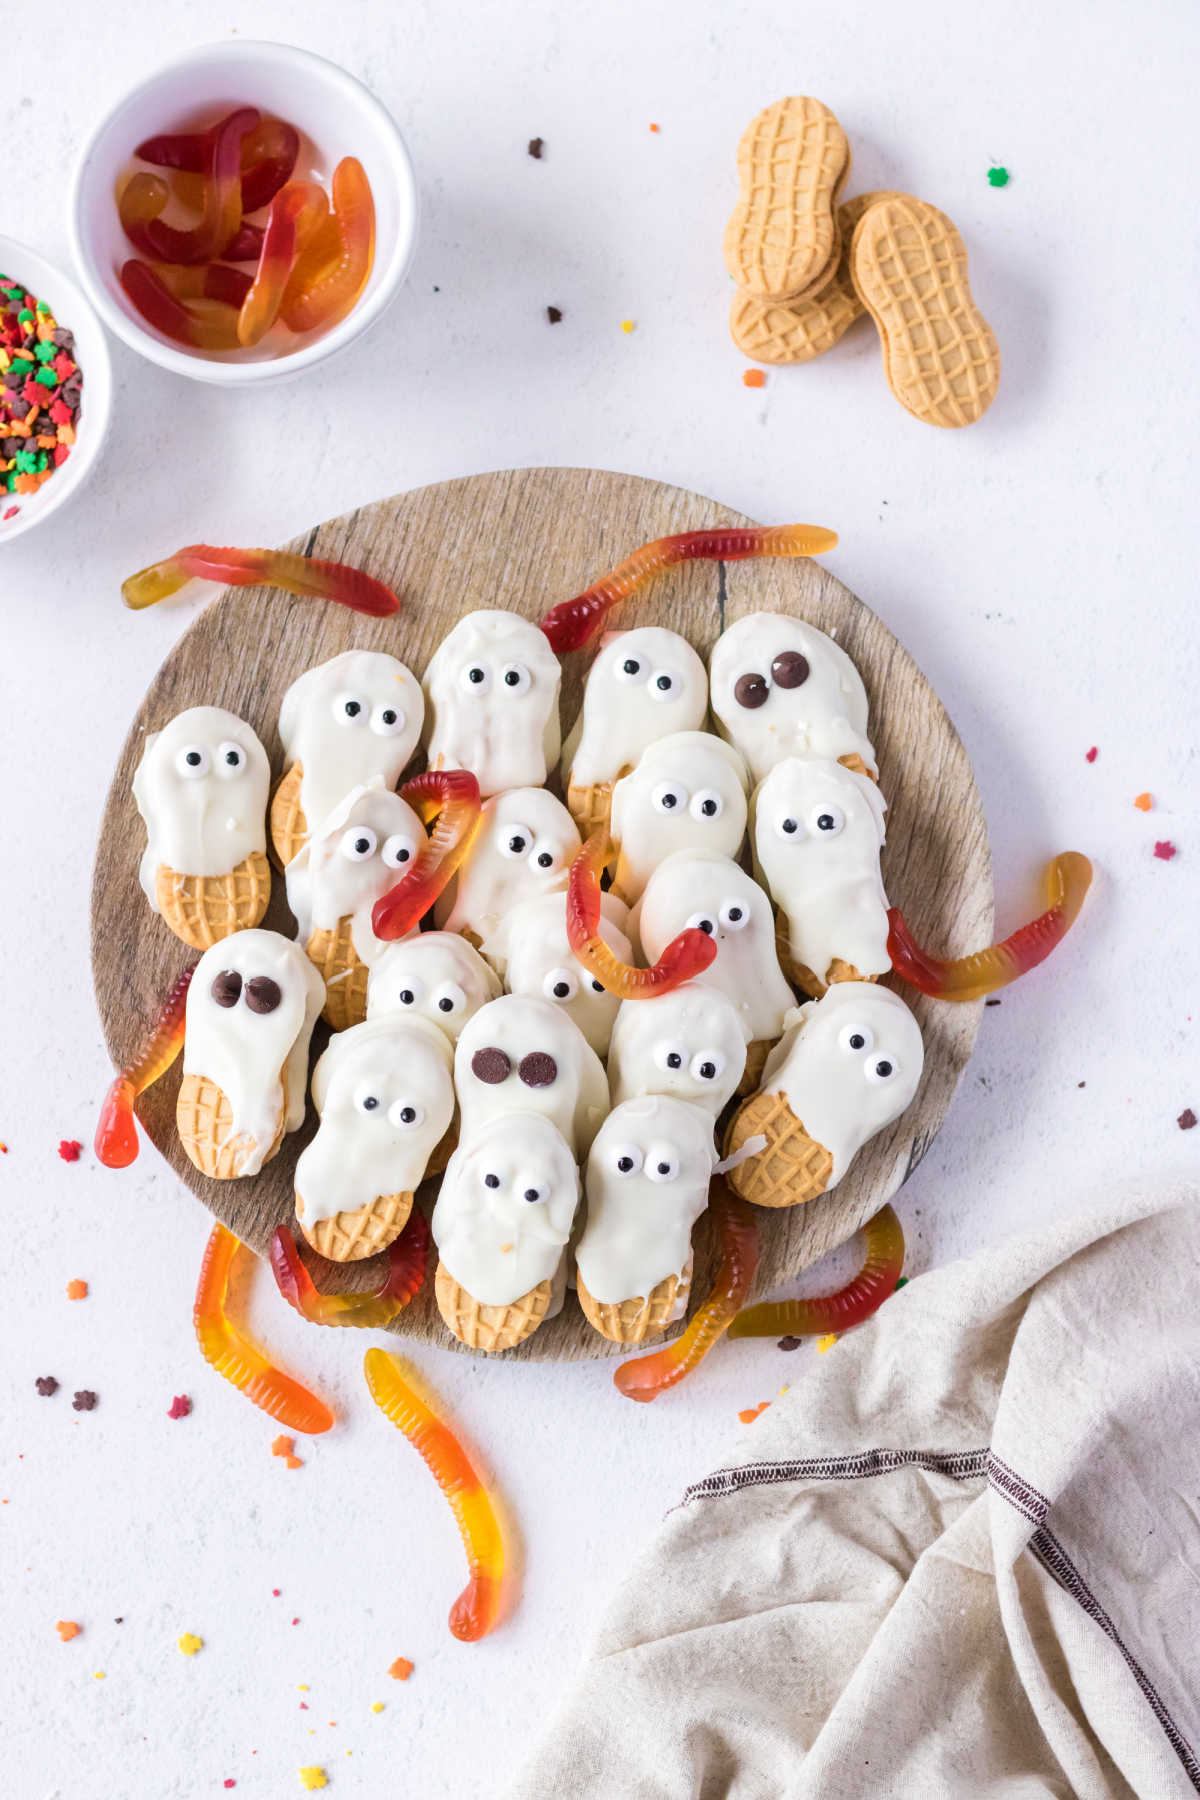 Two kinds of Nutter Butter ghost cookies. One has candy eyes and one has chocolate chip eyes.